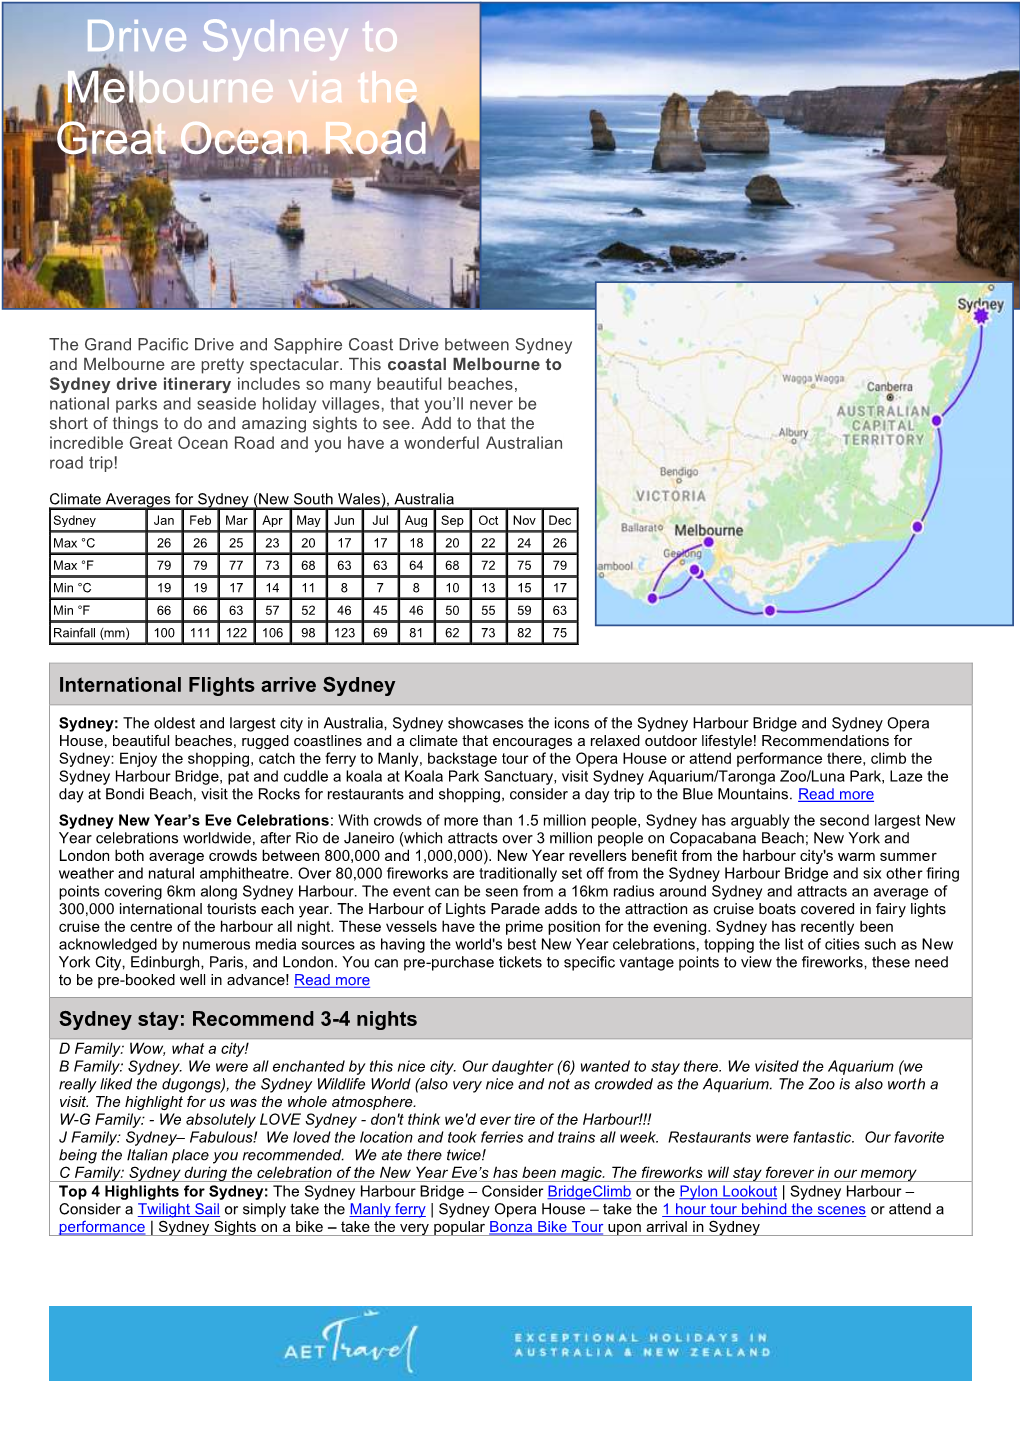 Australia Expat Travel) Can Help Build the Holiday You Are Dreaming Of